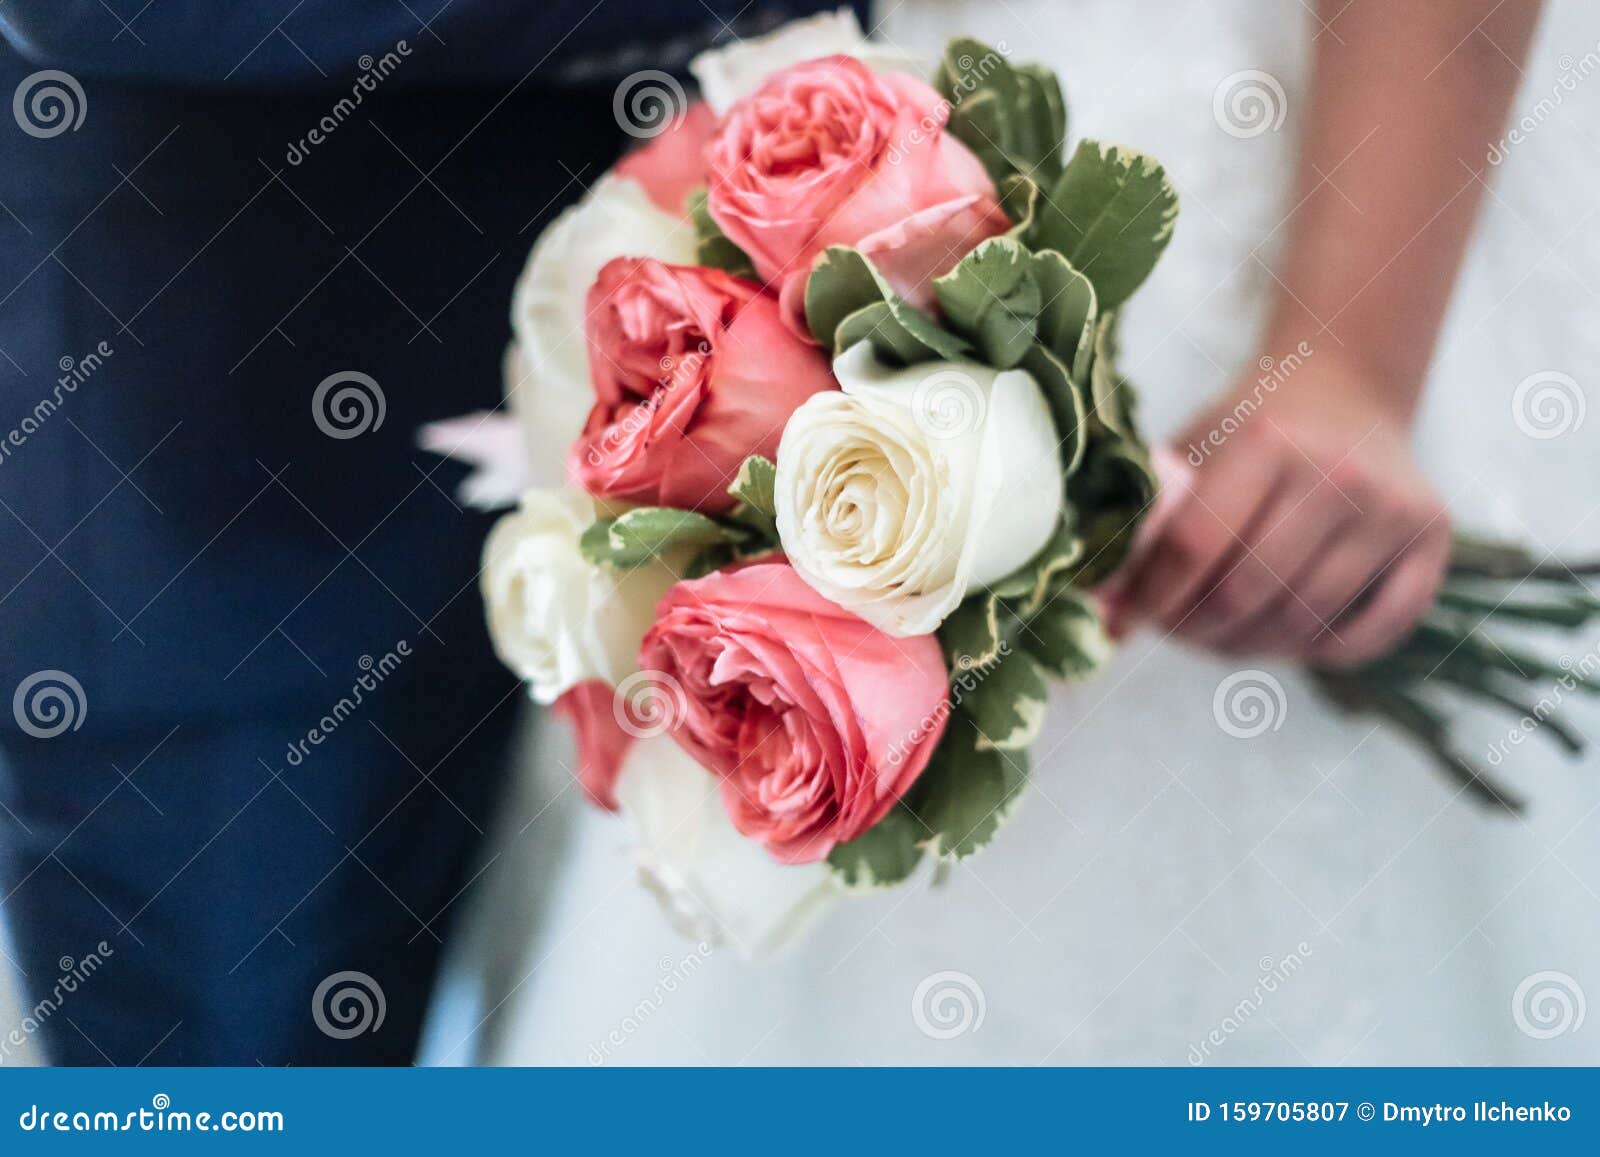 Bride Holds a Bouquet of White and Pink Roses Stock Image - Image of ...